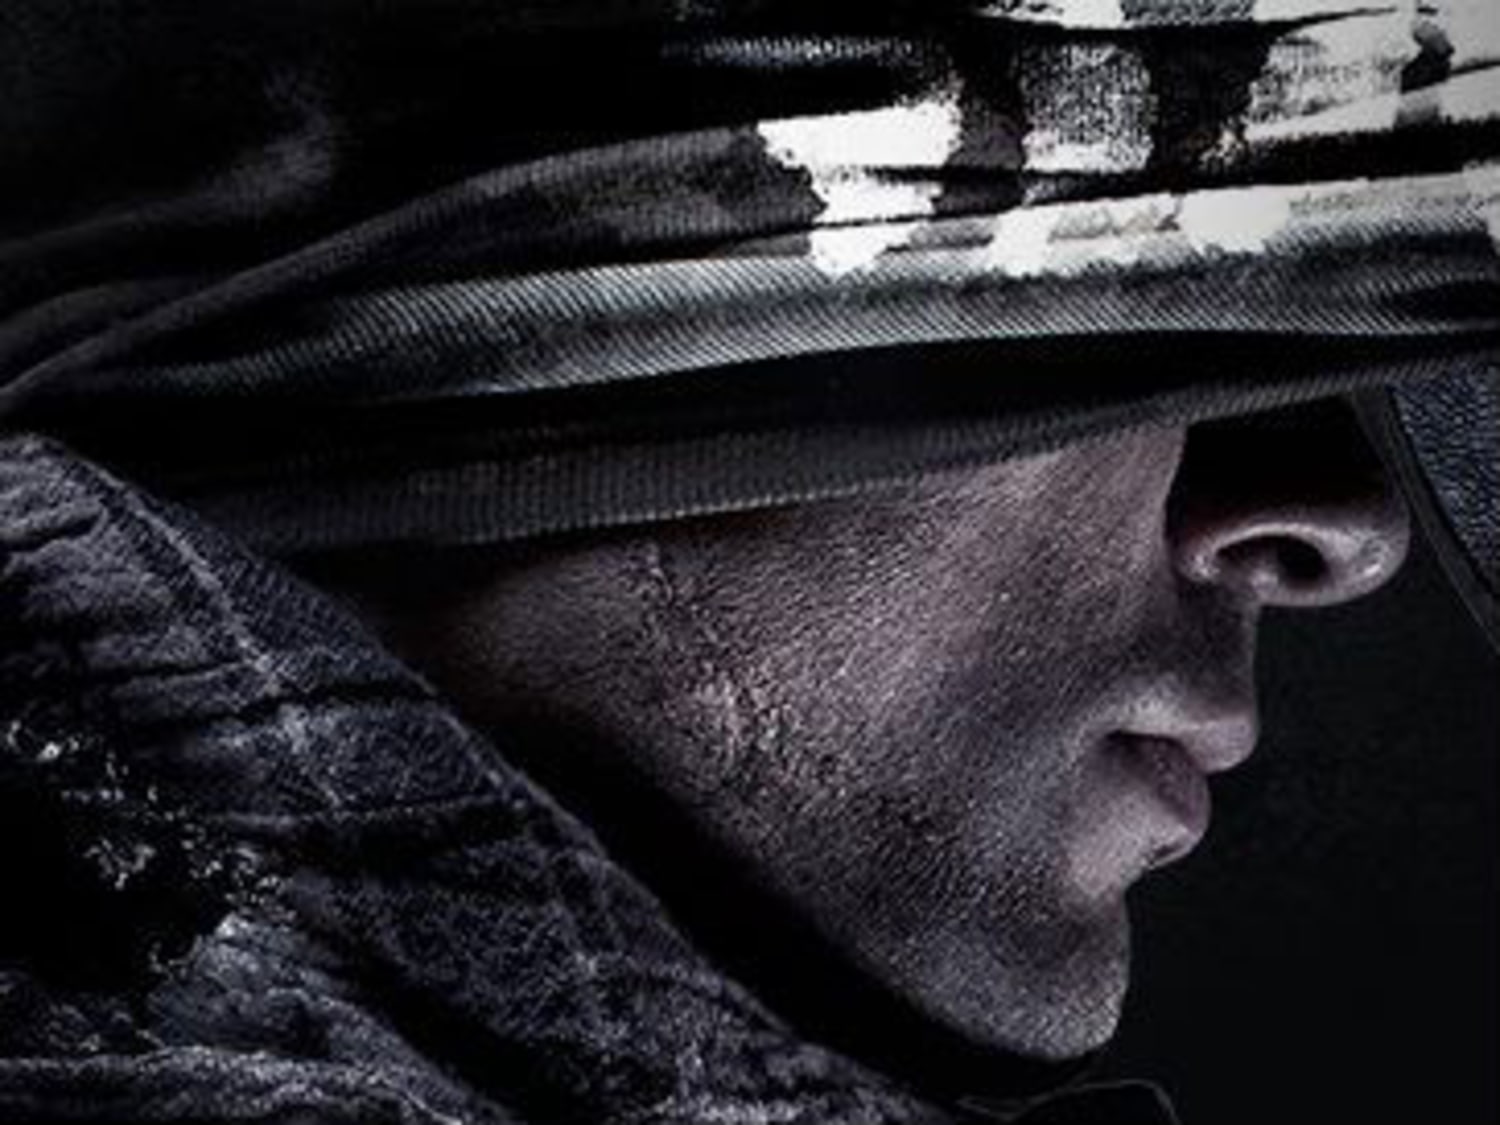 Call of Duty Ghosts Live Action Trailer